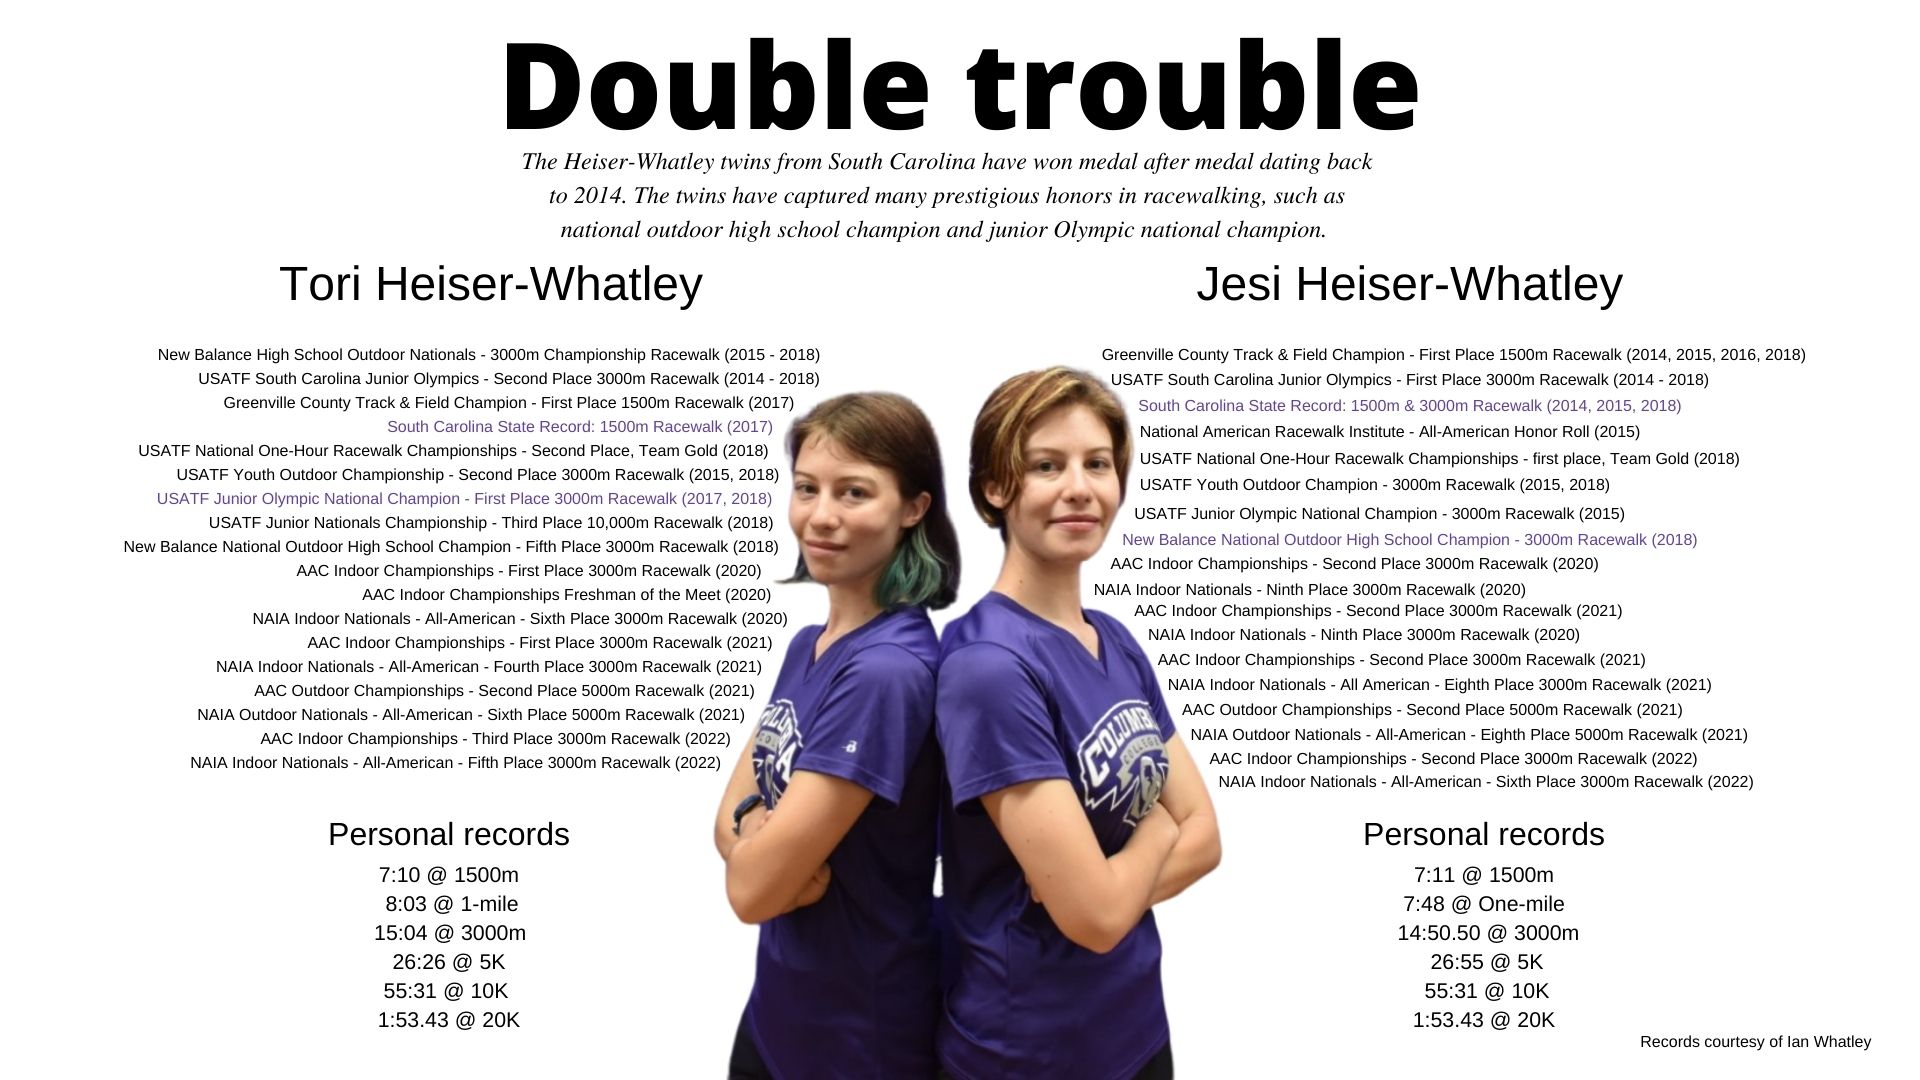 Graphic of Jesi and Tori Heiser-Whatley.